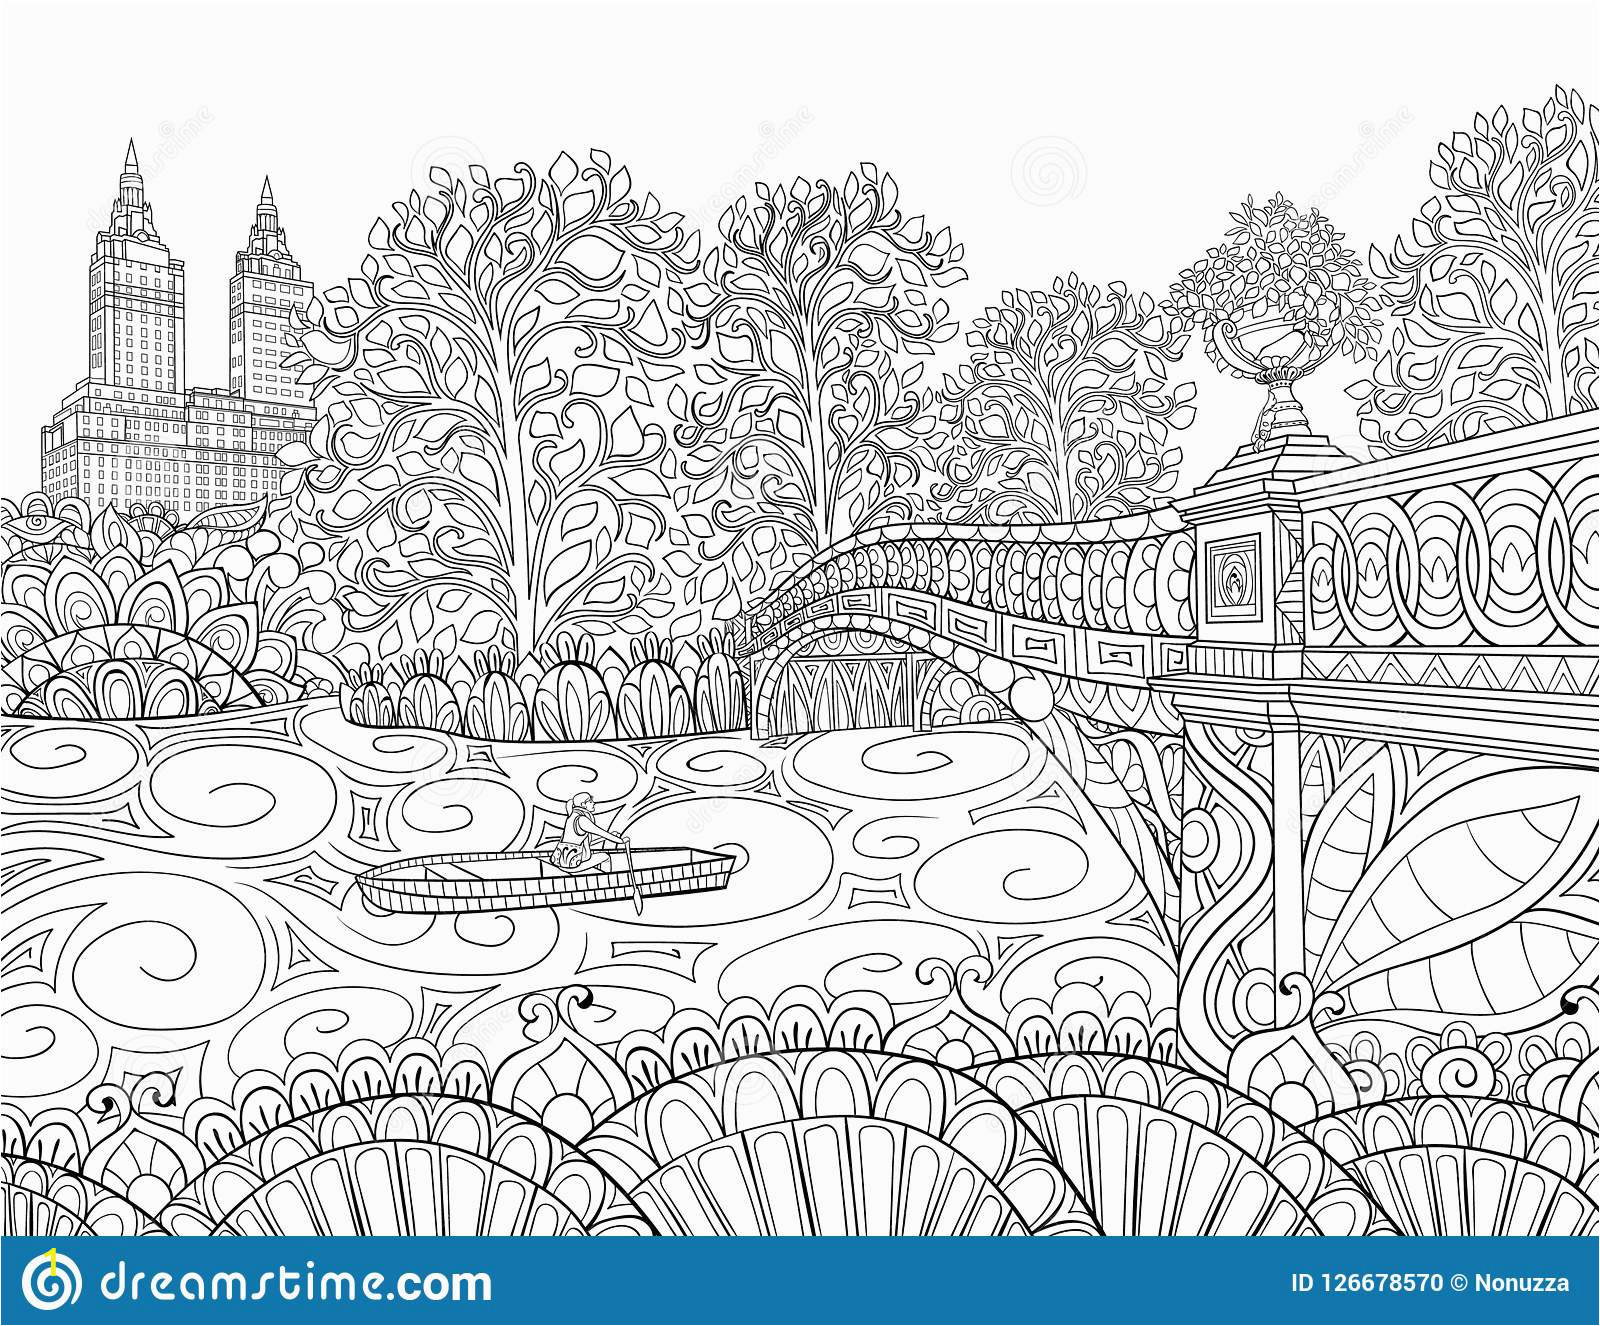 Relaxation Coloring Pages for Adults Coloring Book Adult Coloring Bookpagendscape Image for